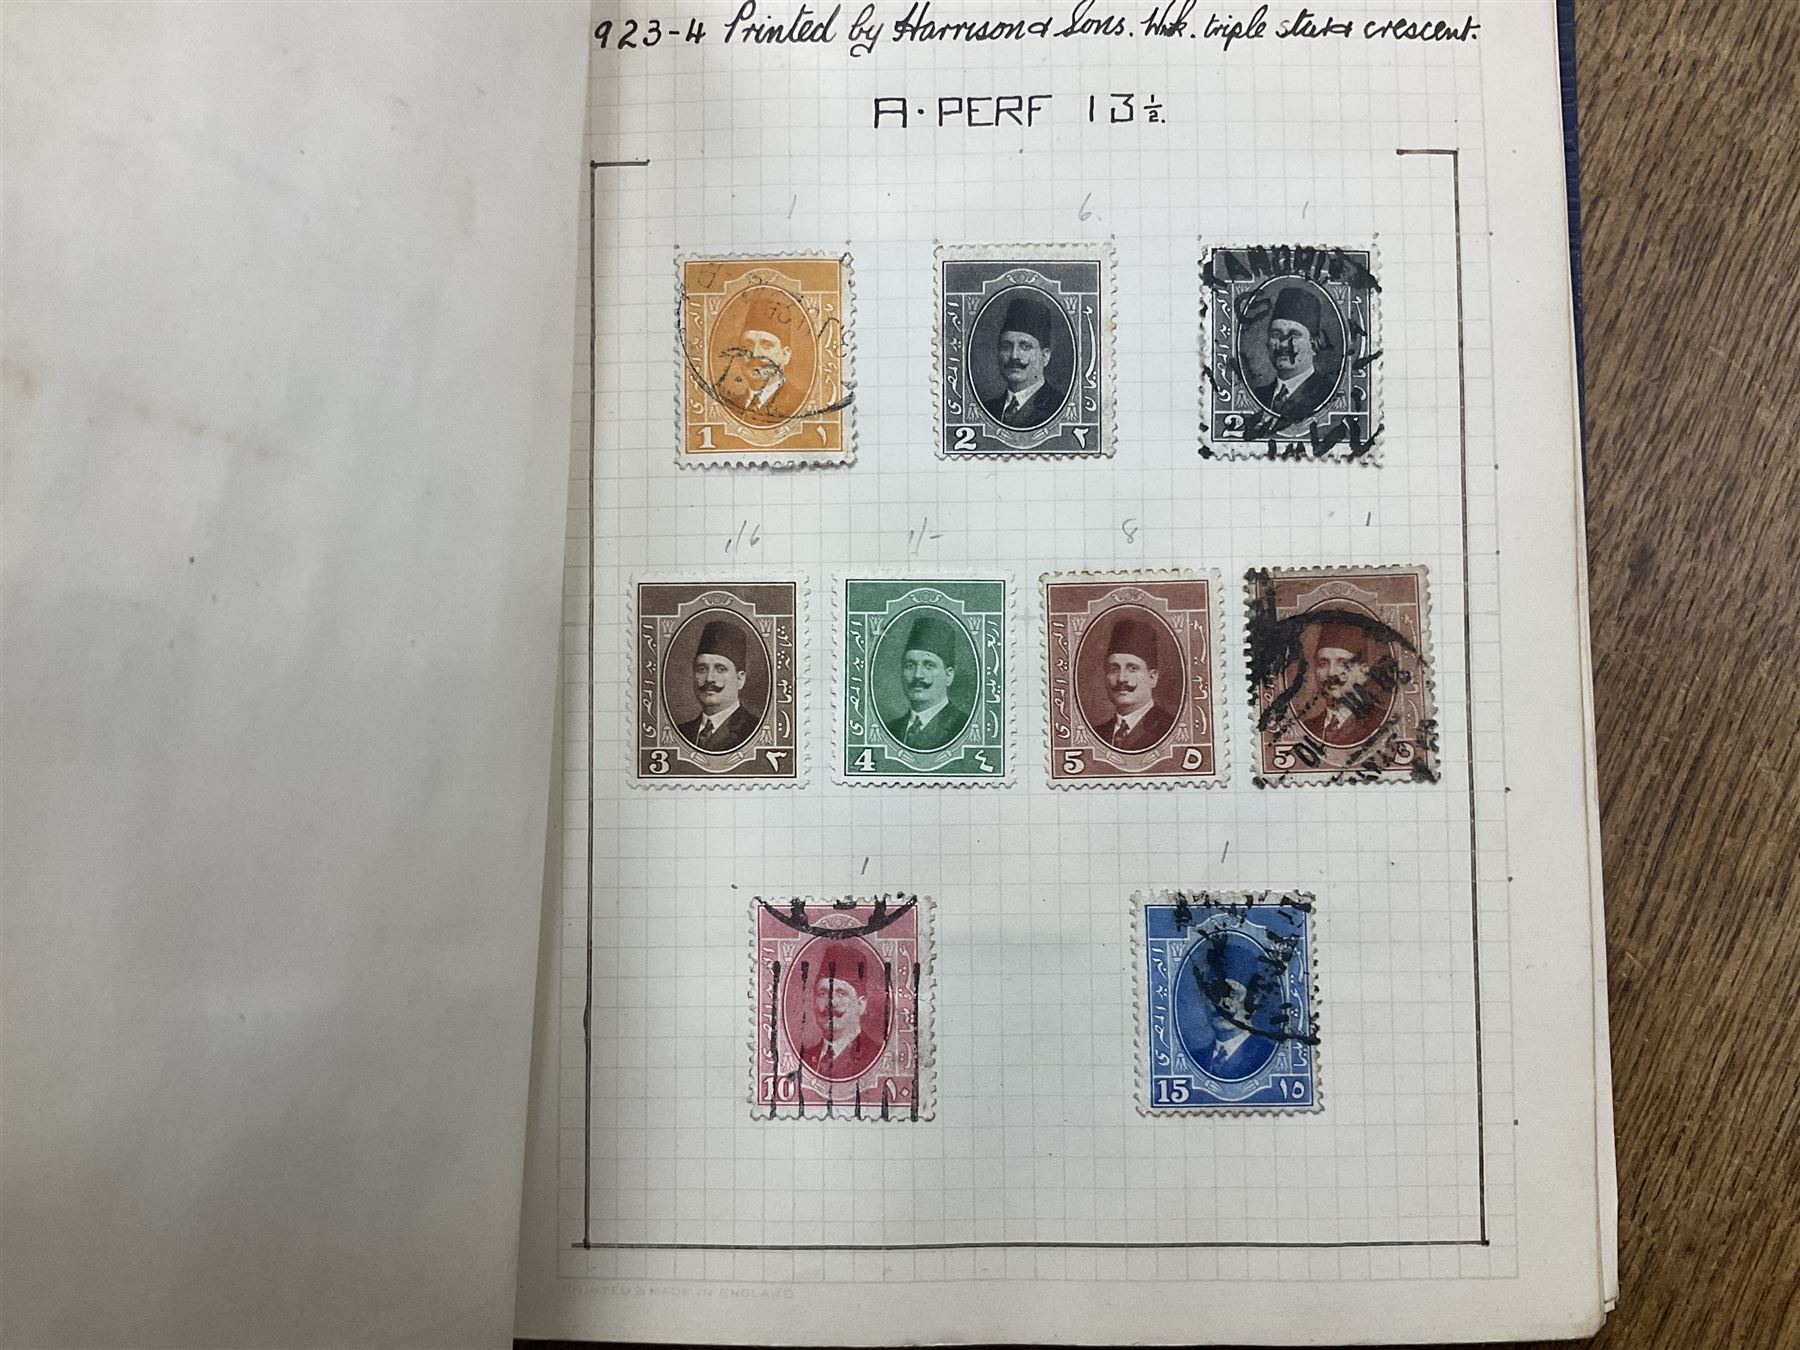 Egypt 1866 and later stamps - Image 393 of 761